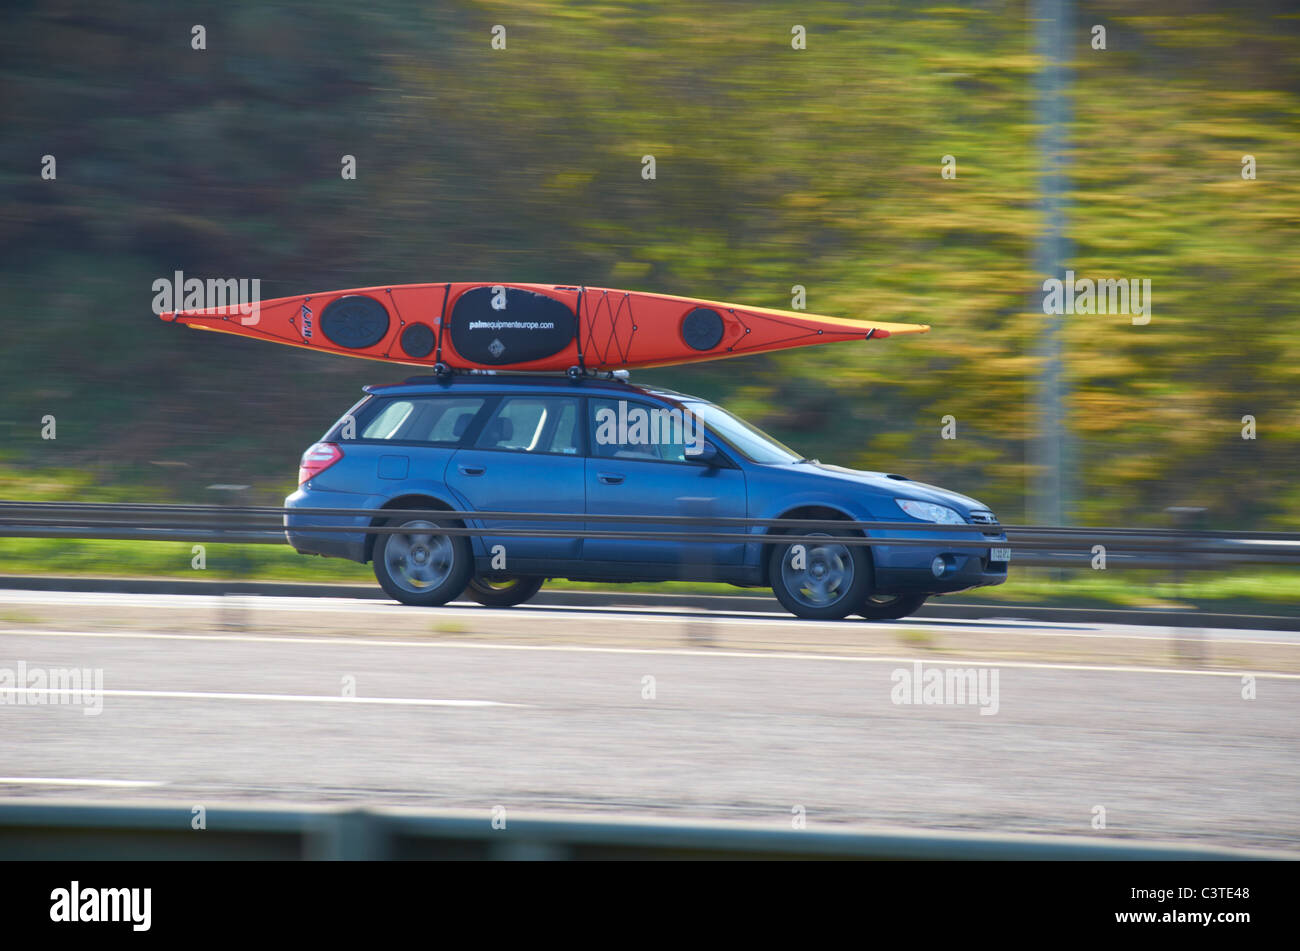 Boat on the roof of a car (on the M62). Stock Photo